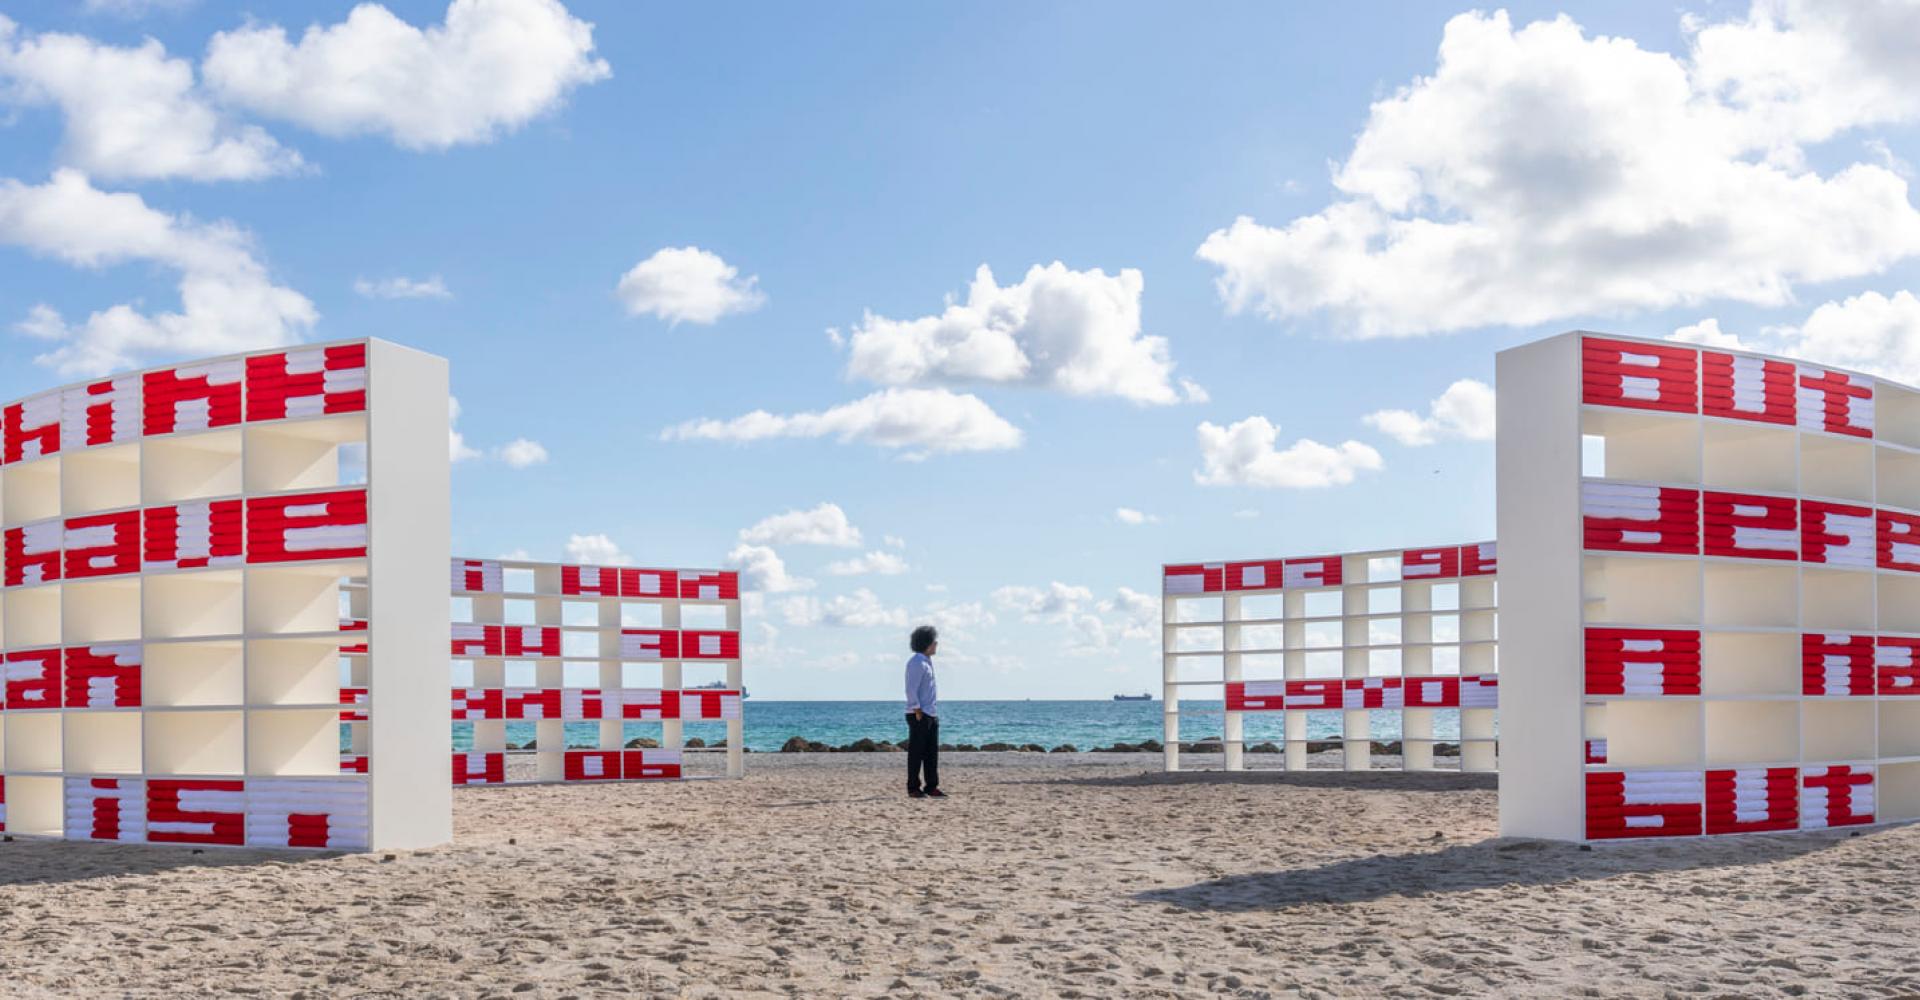 Man standing in the middle of an art installment on the beach